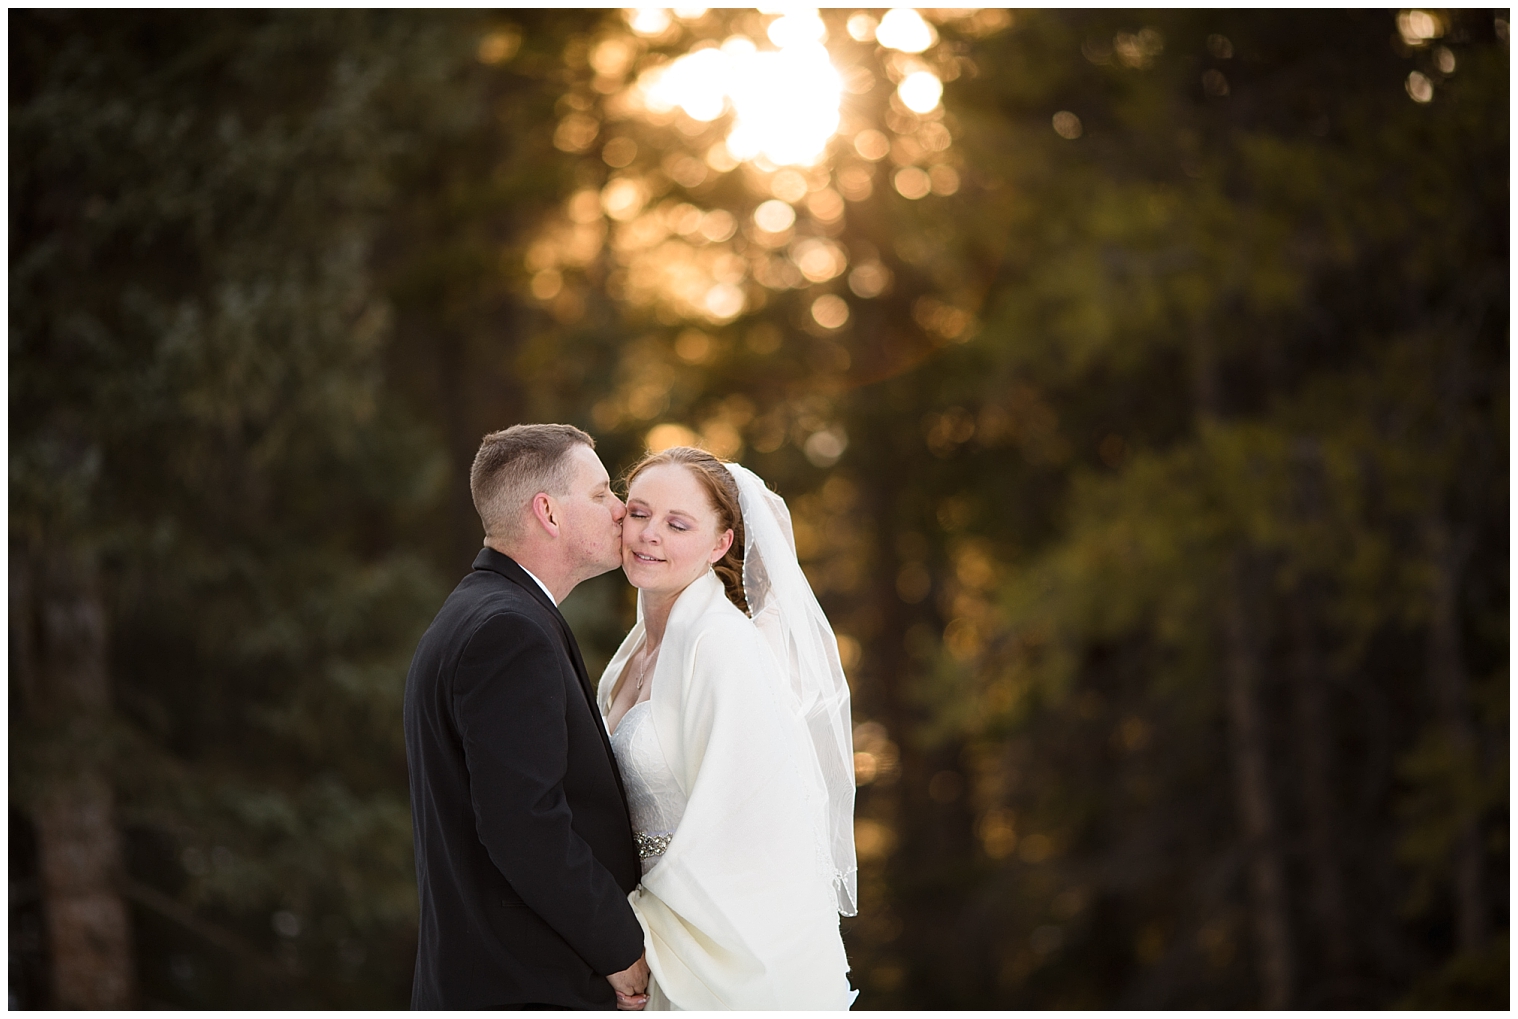 Groom kiss his bride on the cheek during portraits at their Colorado mountain elopement.